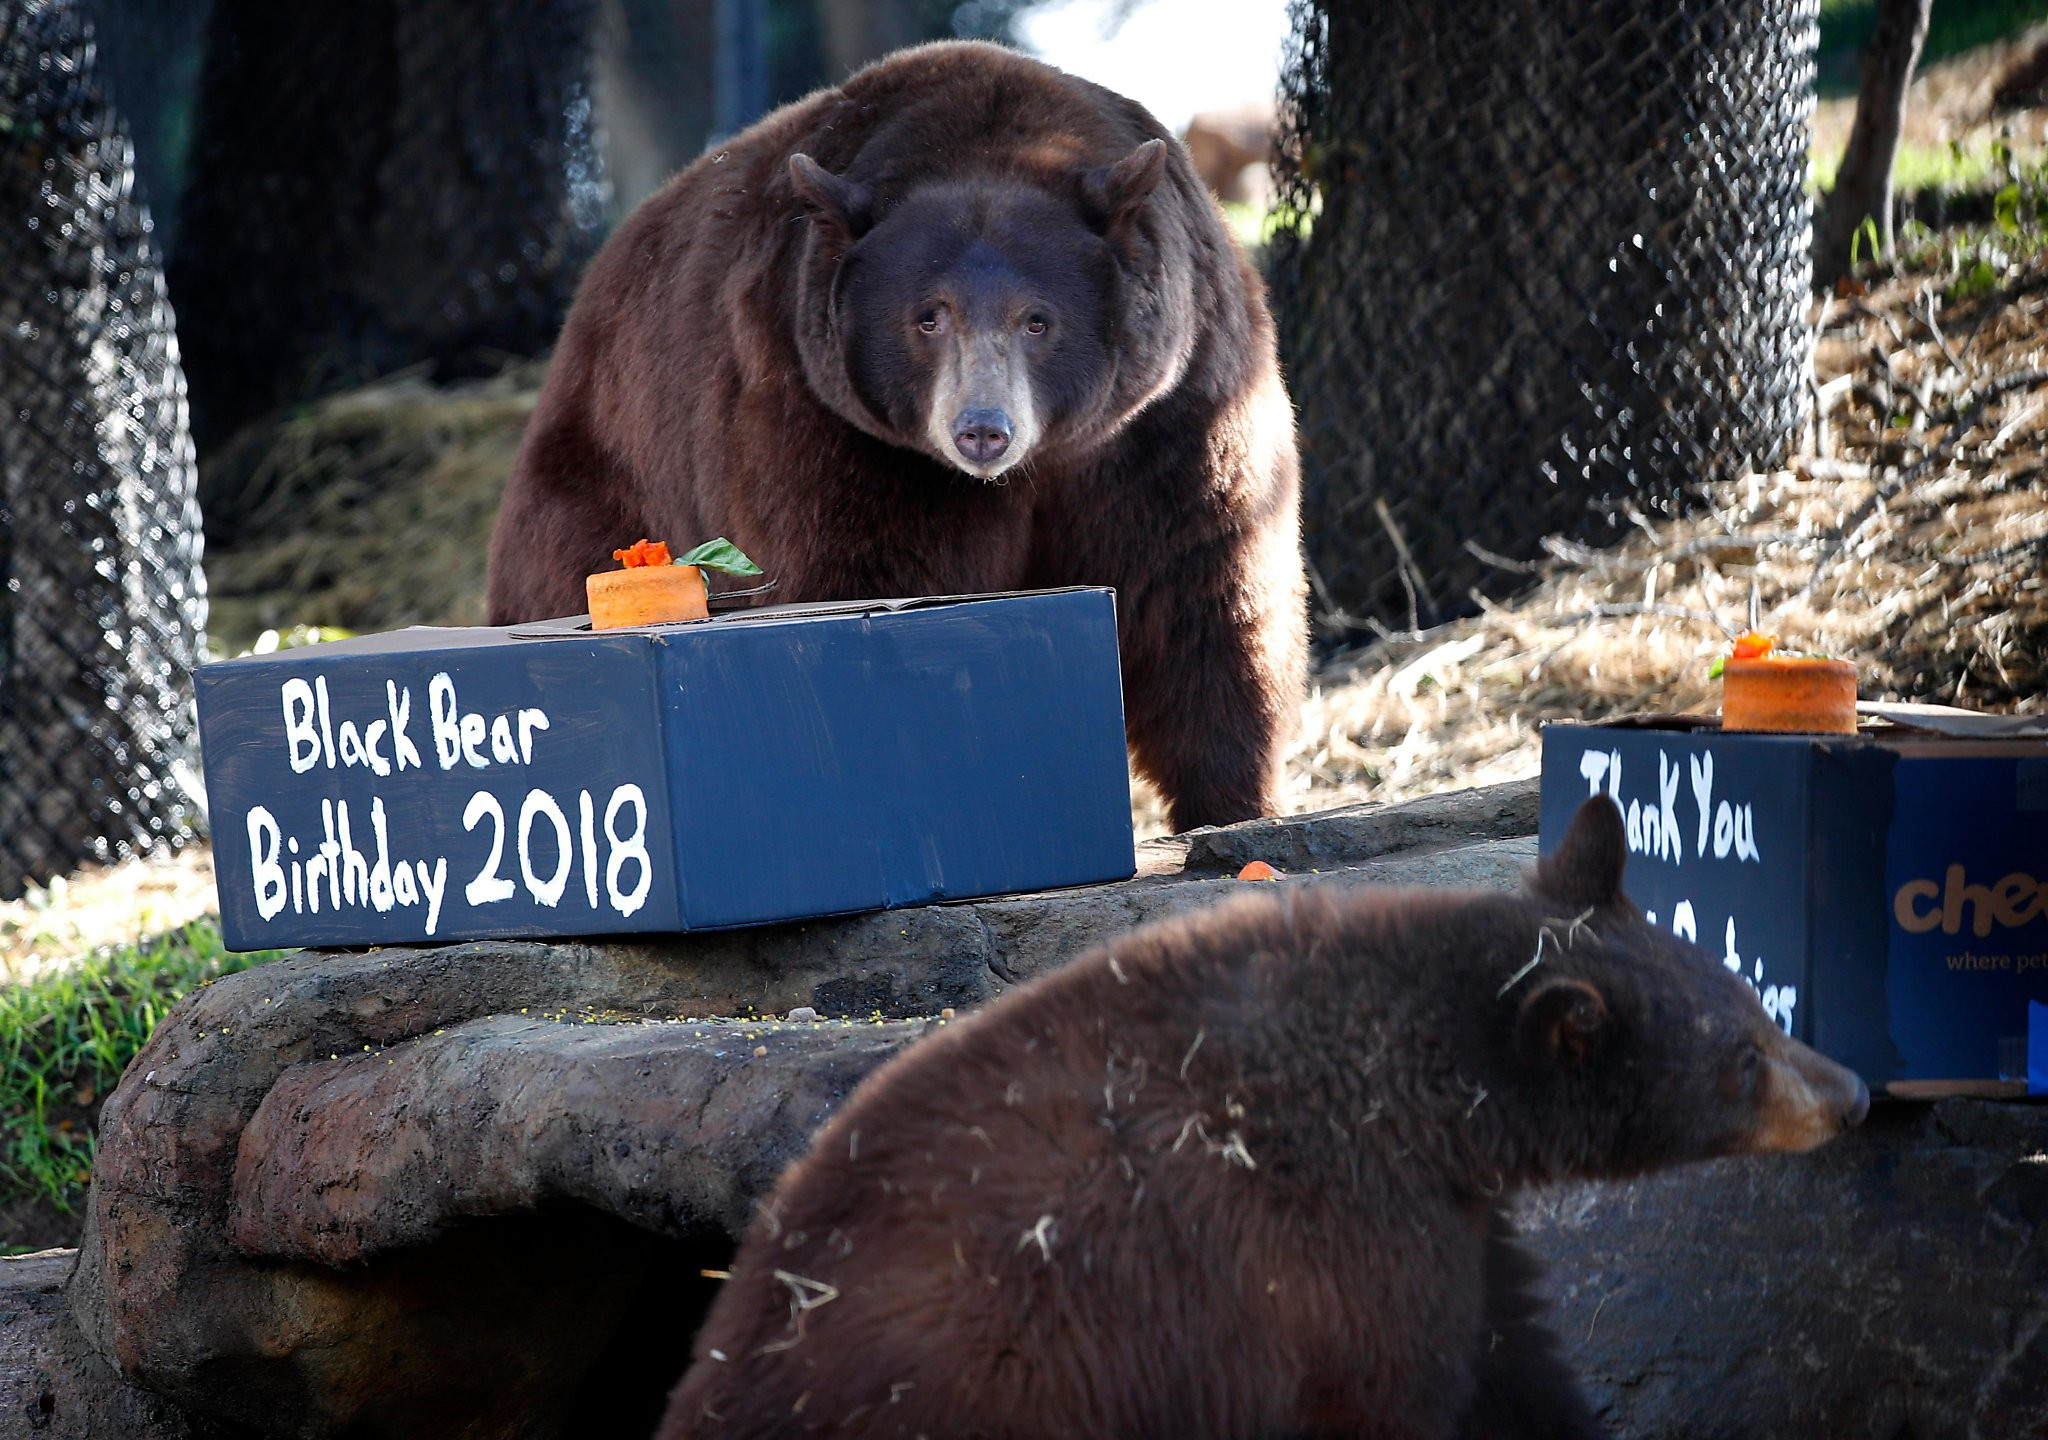 Oakland Zoo Birthday Party
 Black bears eat birthday cake in their new Oakland Zoo